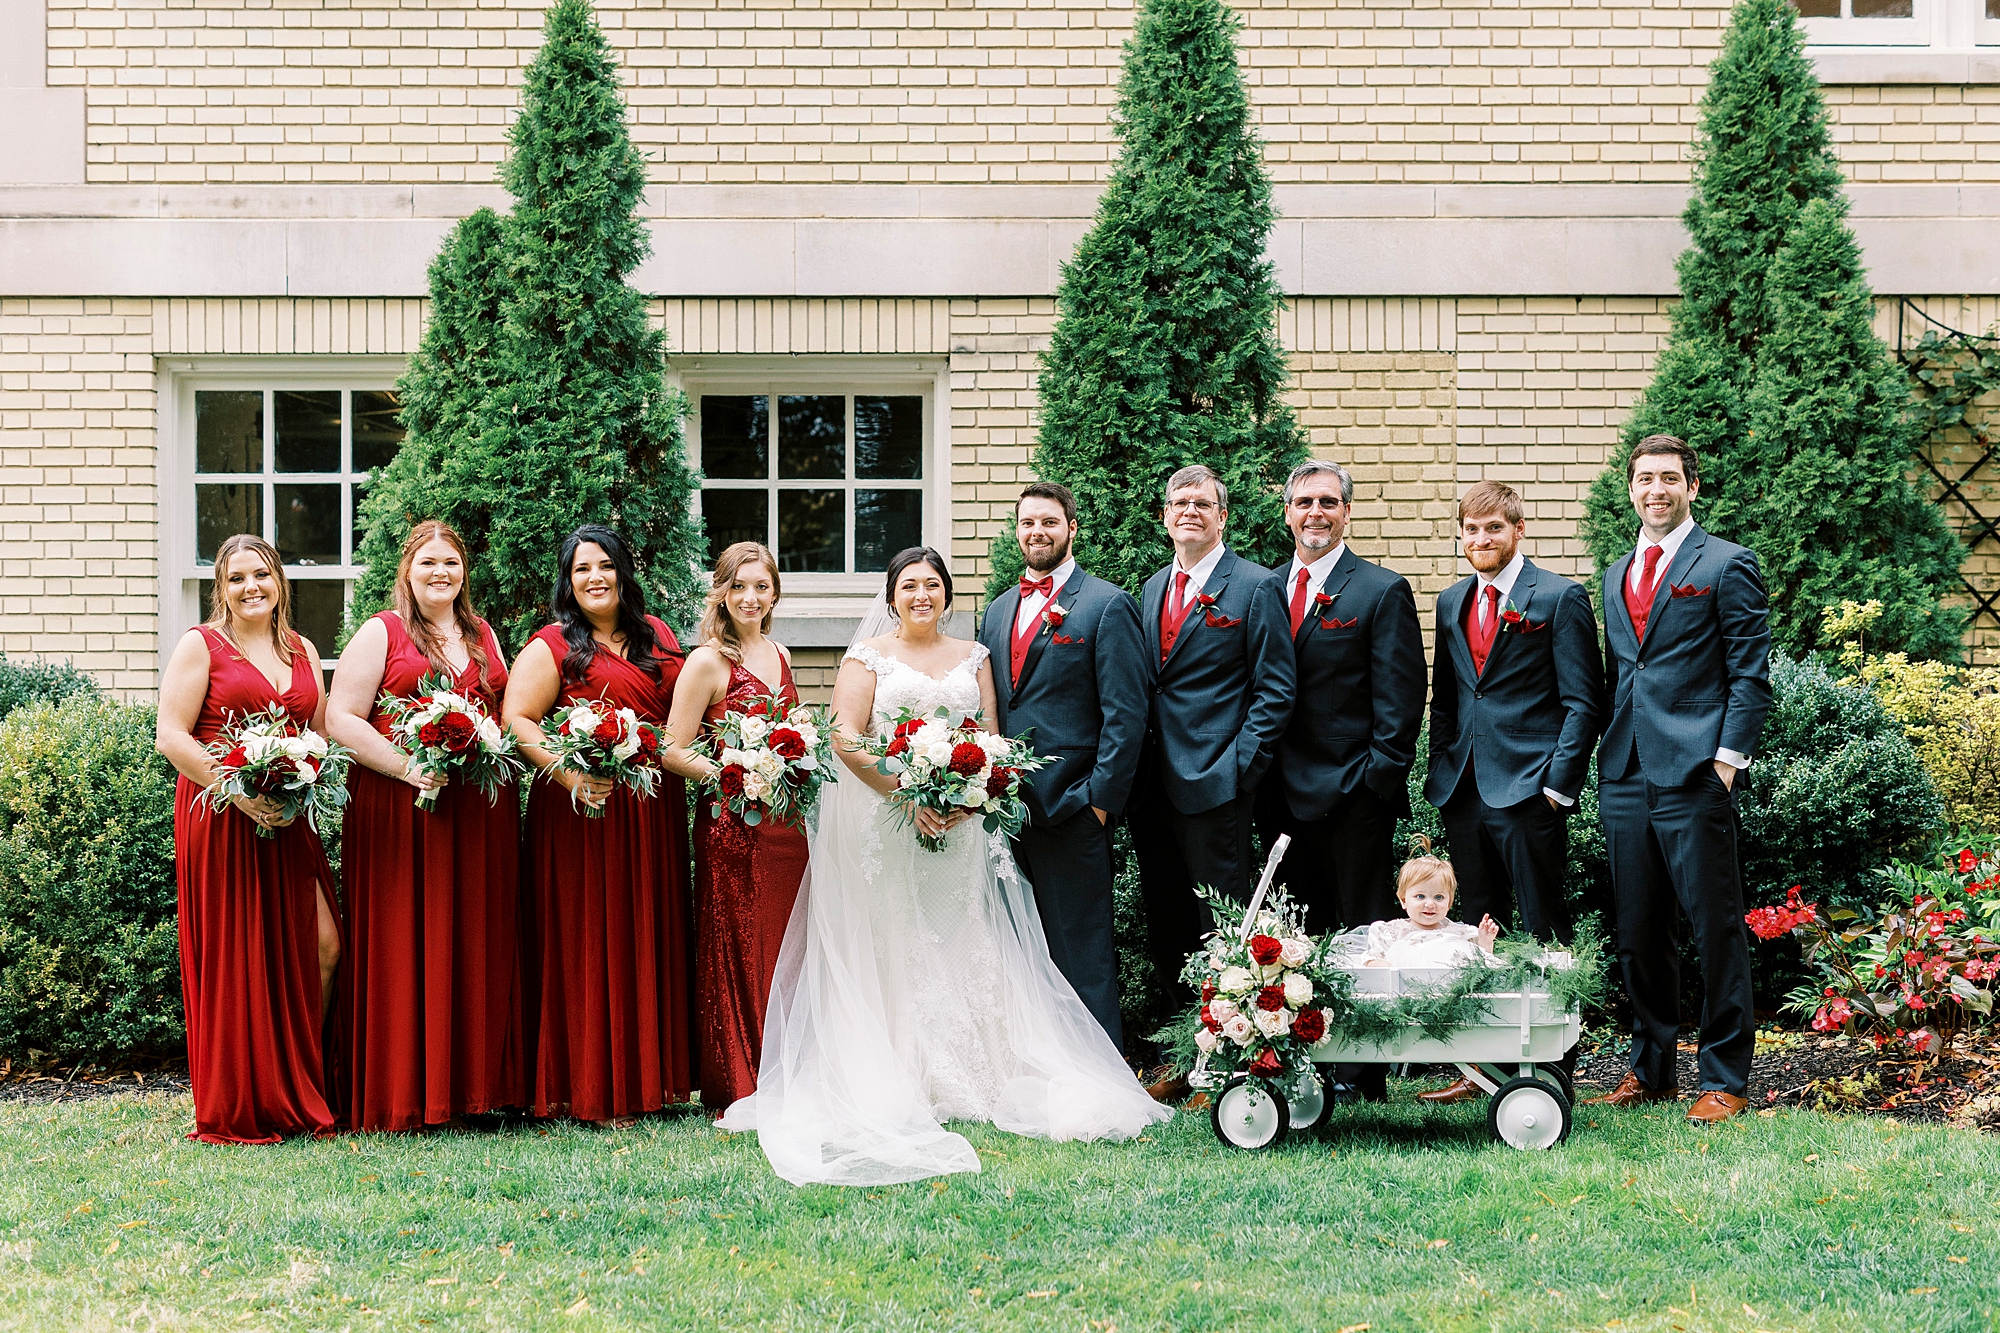 bride and groom pose with wedding party in red and navy